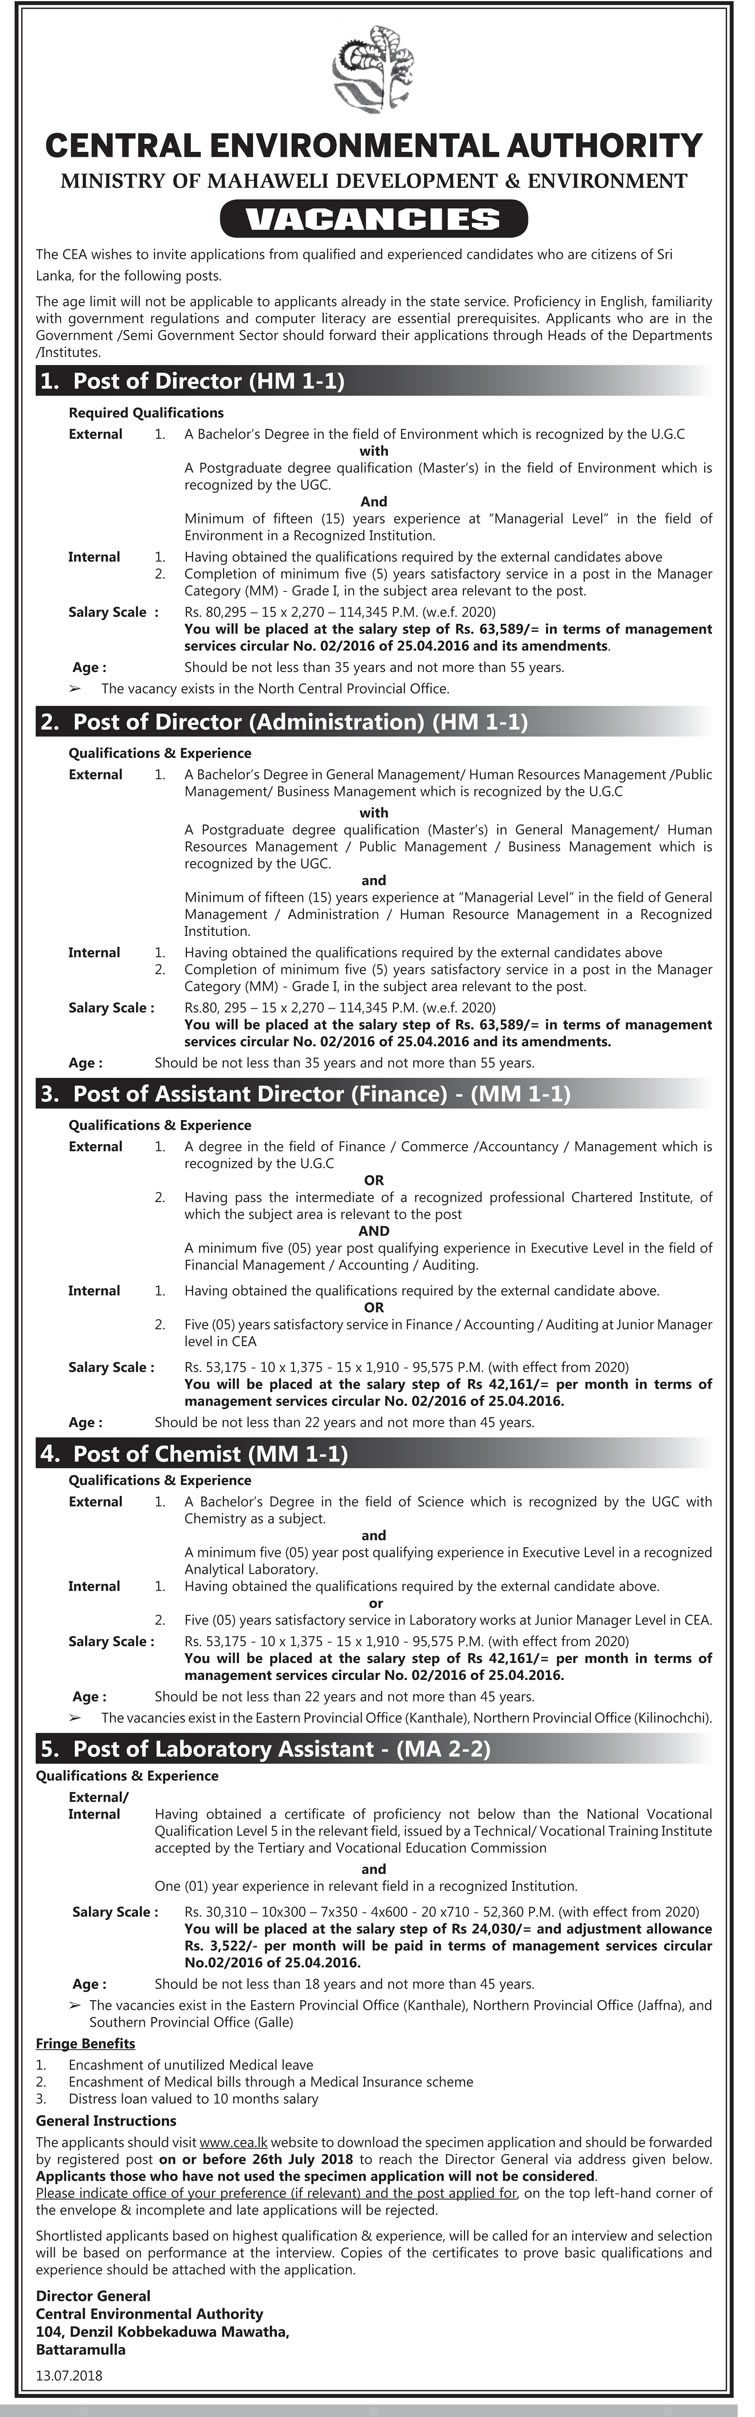 Director / Assistant Director / Chemist / Laboratory Assistant - Central Environmental Authority Jobs Vacancies